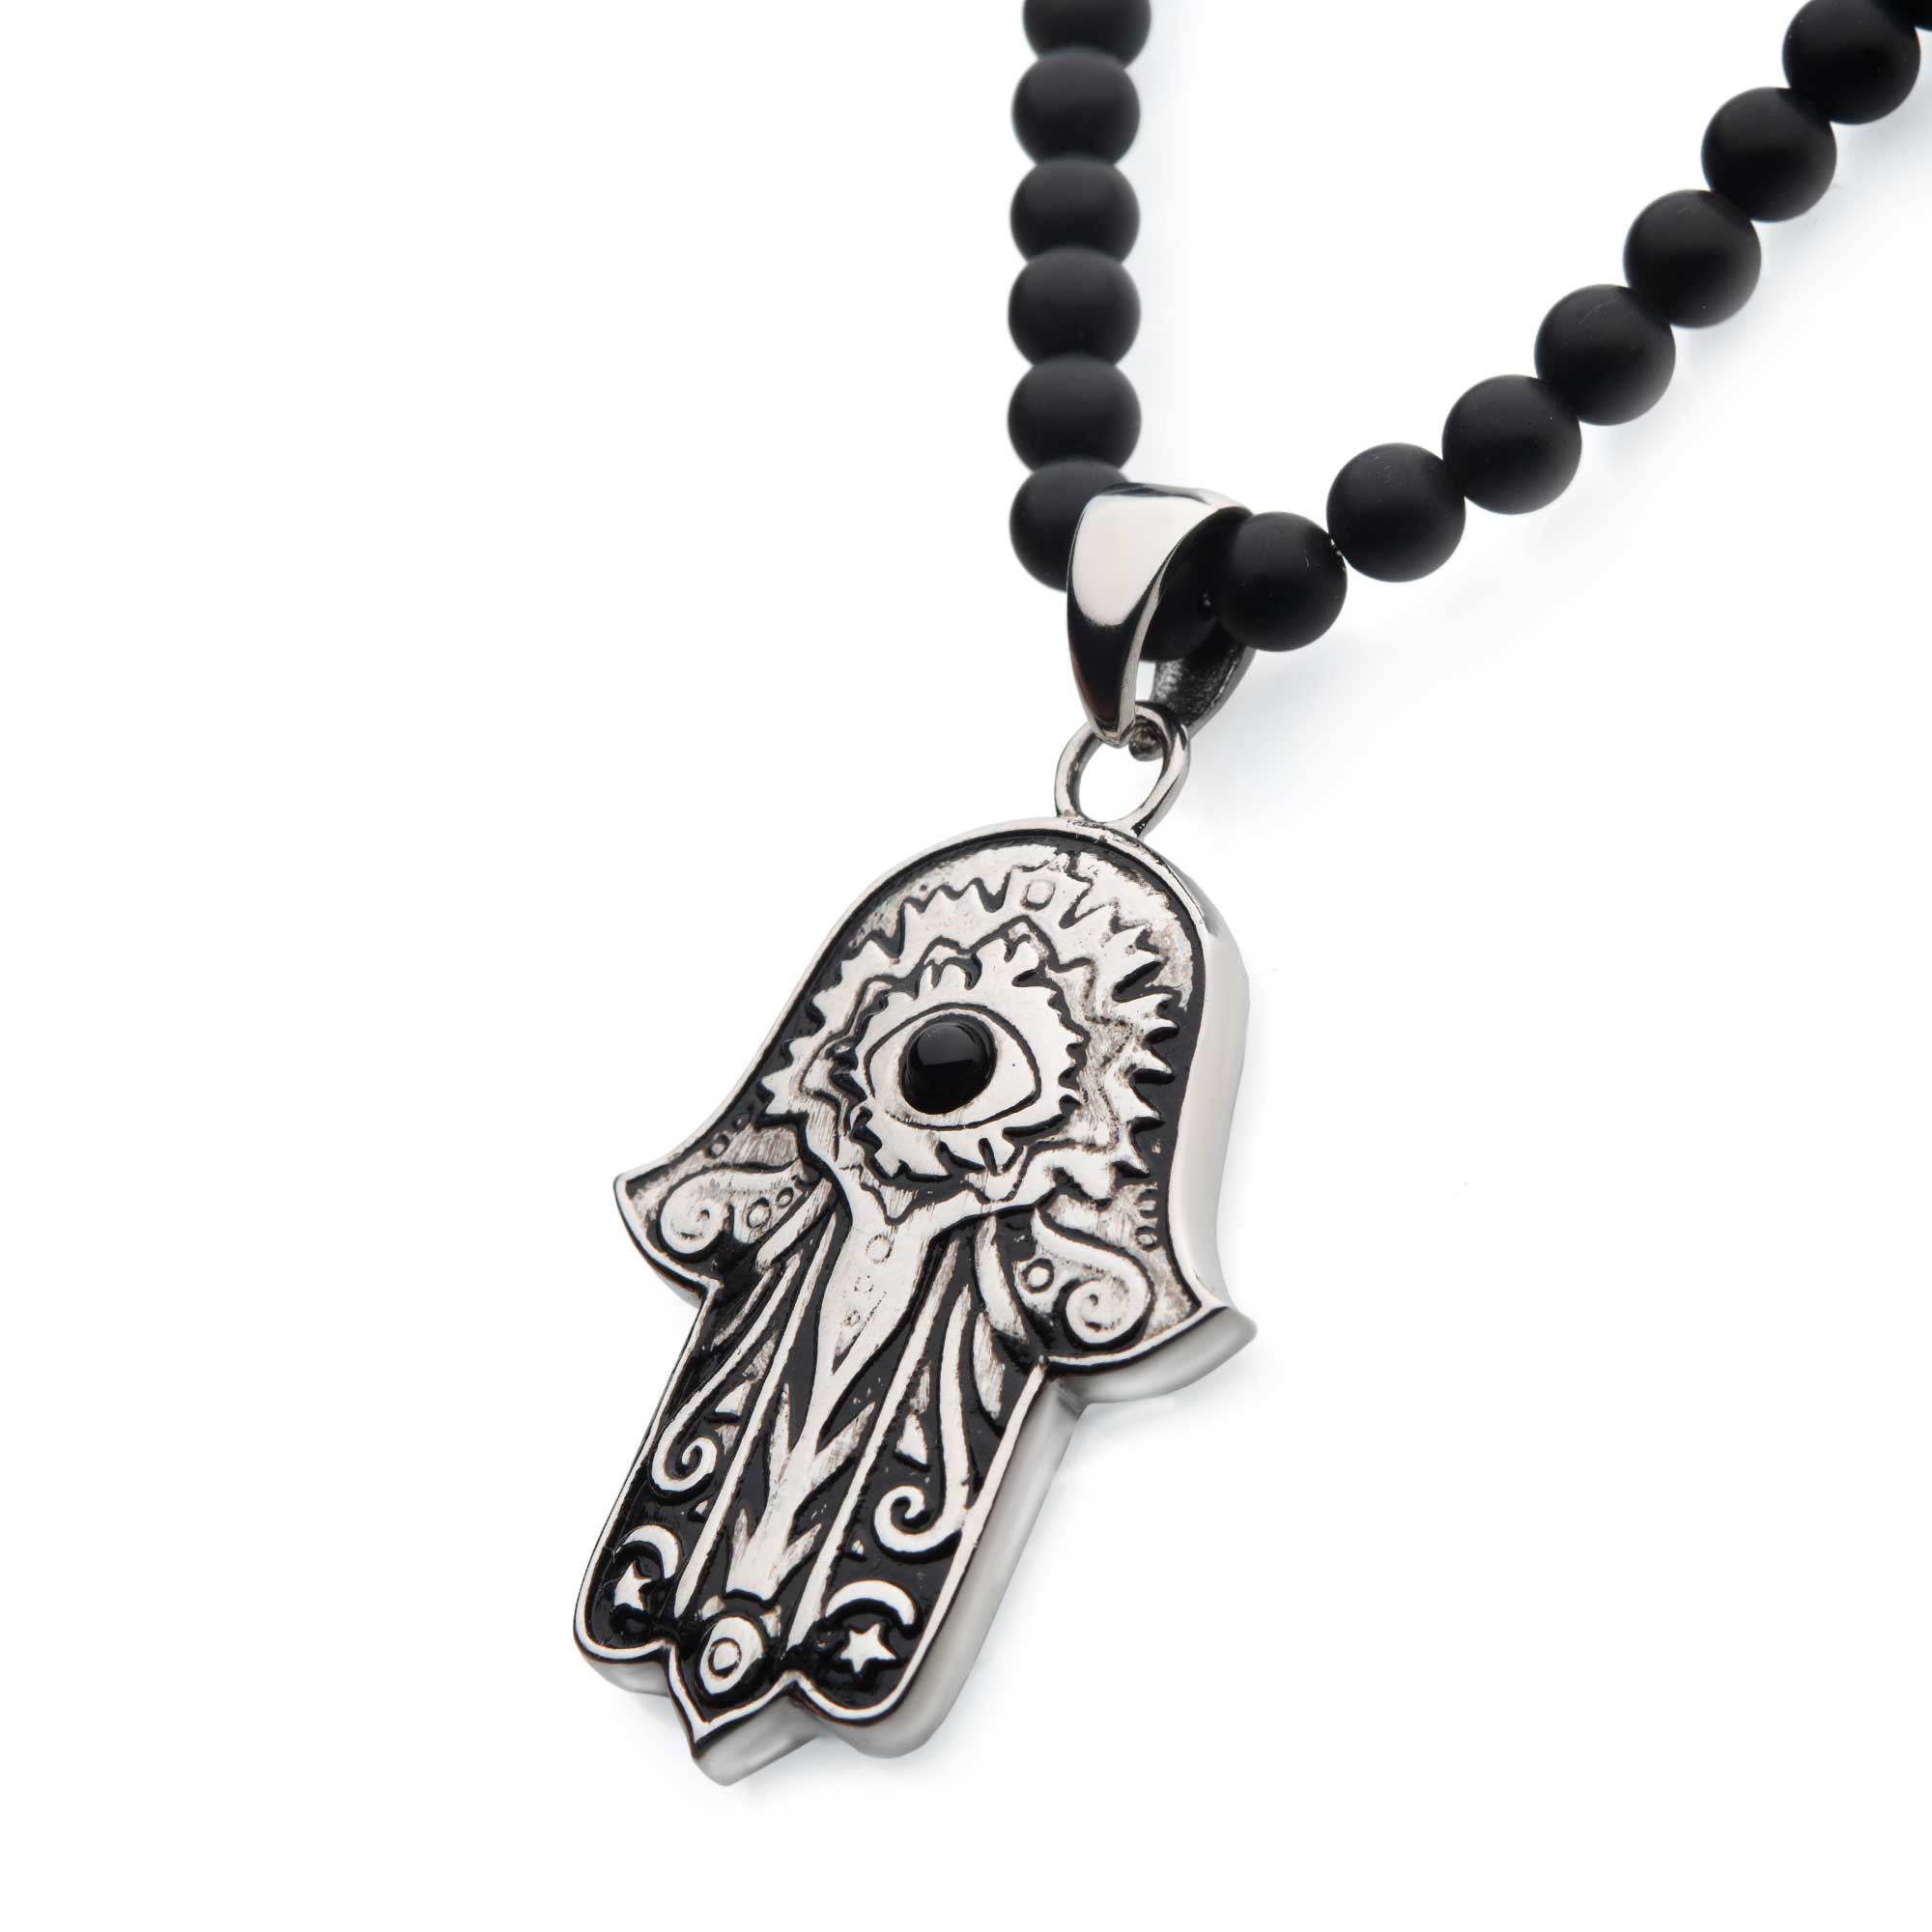 Stainless Steel with Centerpiece Black Agate Stone Hamsa Pendant, with Black Agate Stone Bead Necklace Image 2 Ken Walker Jewelers Gig Harbor, WA